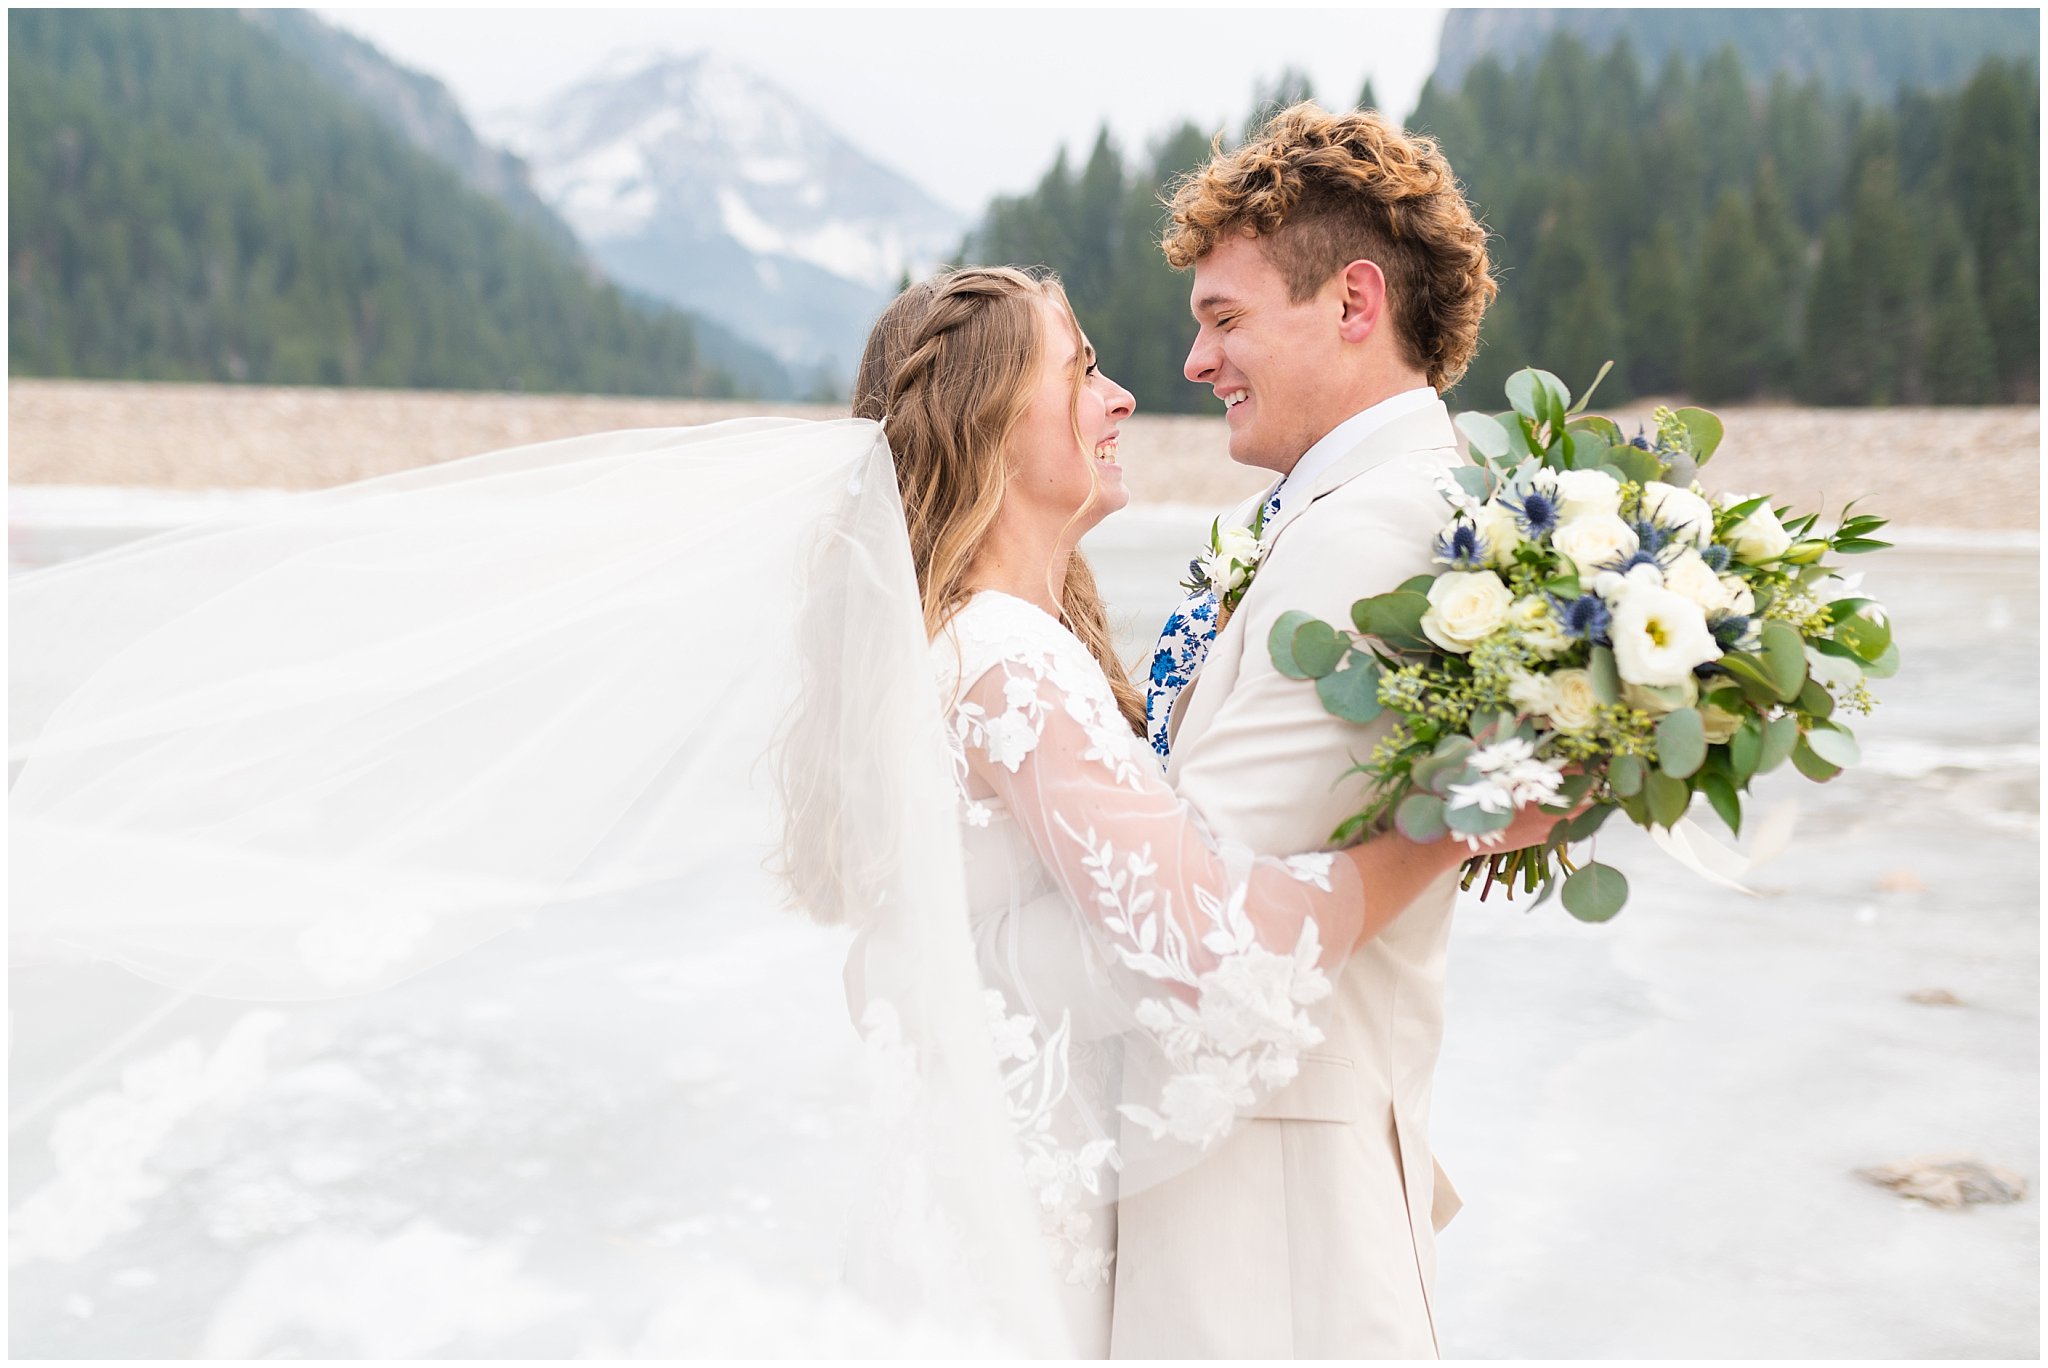 Bride in the mountains on frozen lake wearing lace dress with veil and white floral bouquet | Tibble Fork Winter Formal Session | Jessie and Dallin Photography